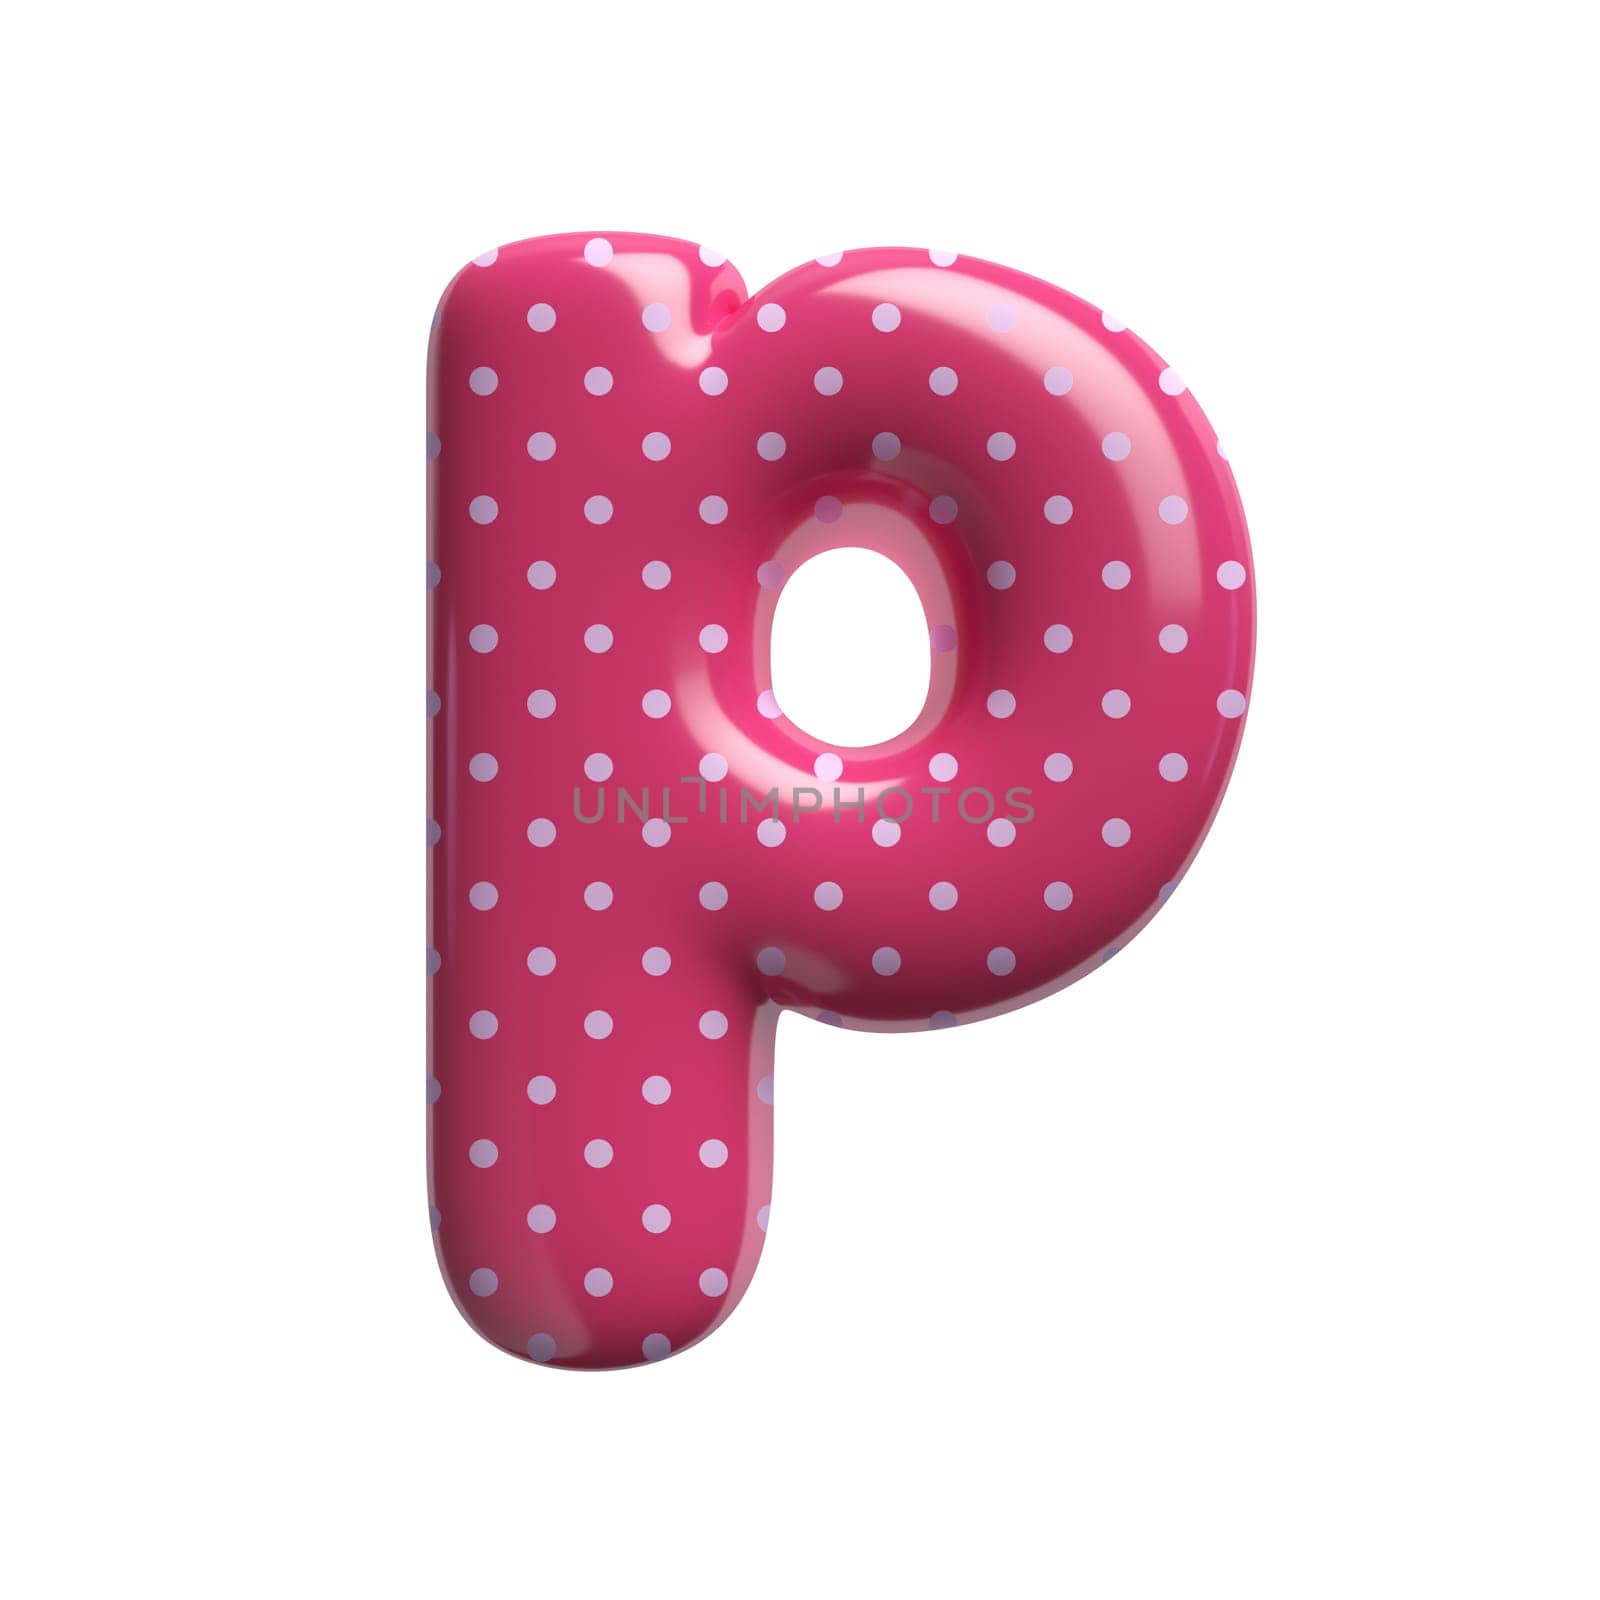 Polka dot letter P - Lowercase 3d pink retro font - Suitable for Fashion, retro design or decoration related subjects by chrisroll